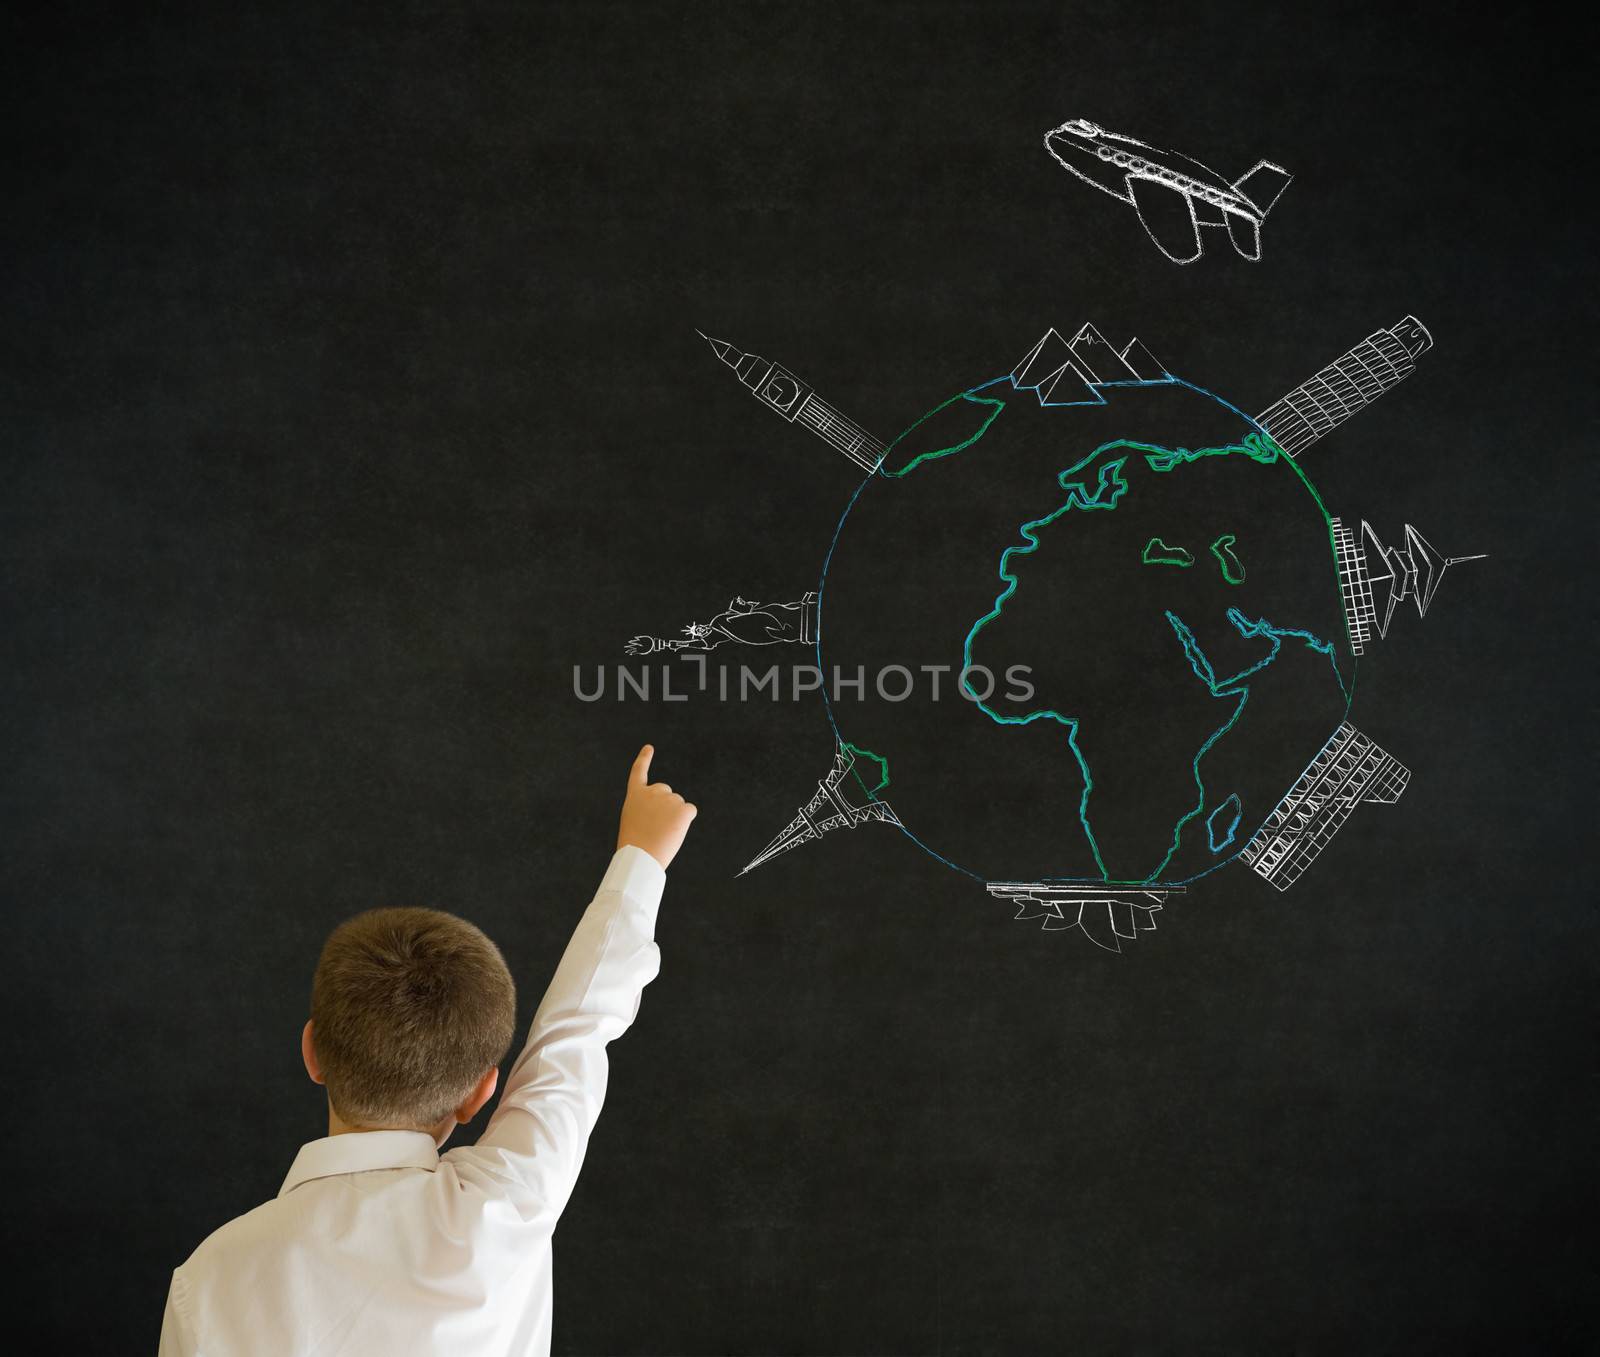 Boy dressed as business man with chalk world wonders on background by alistaircotton